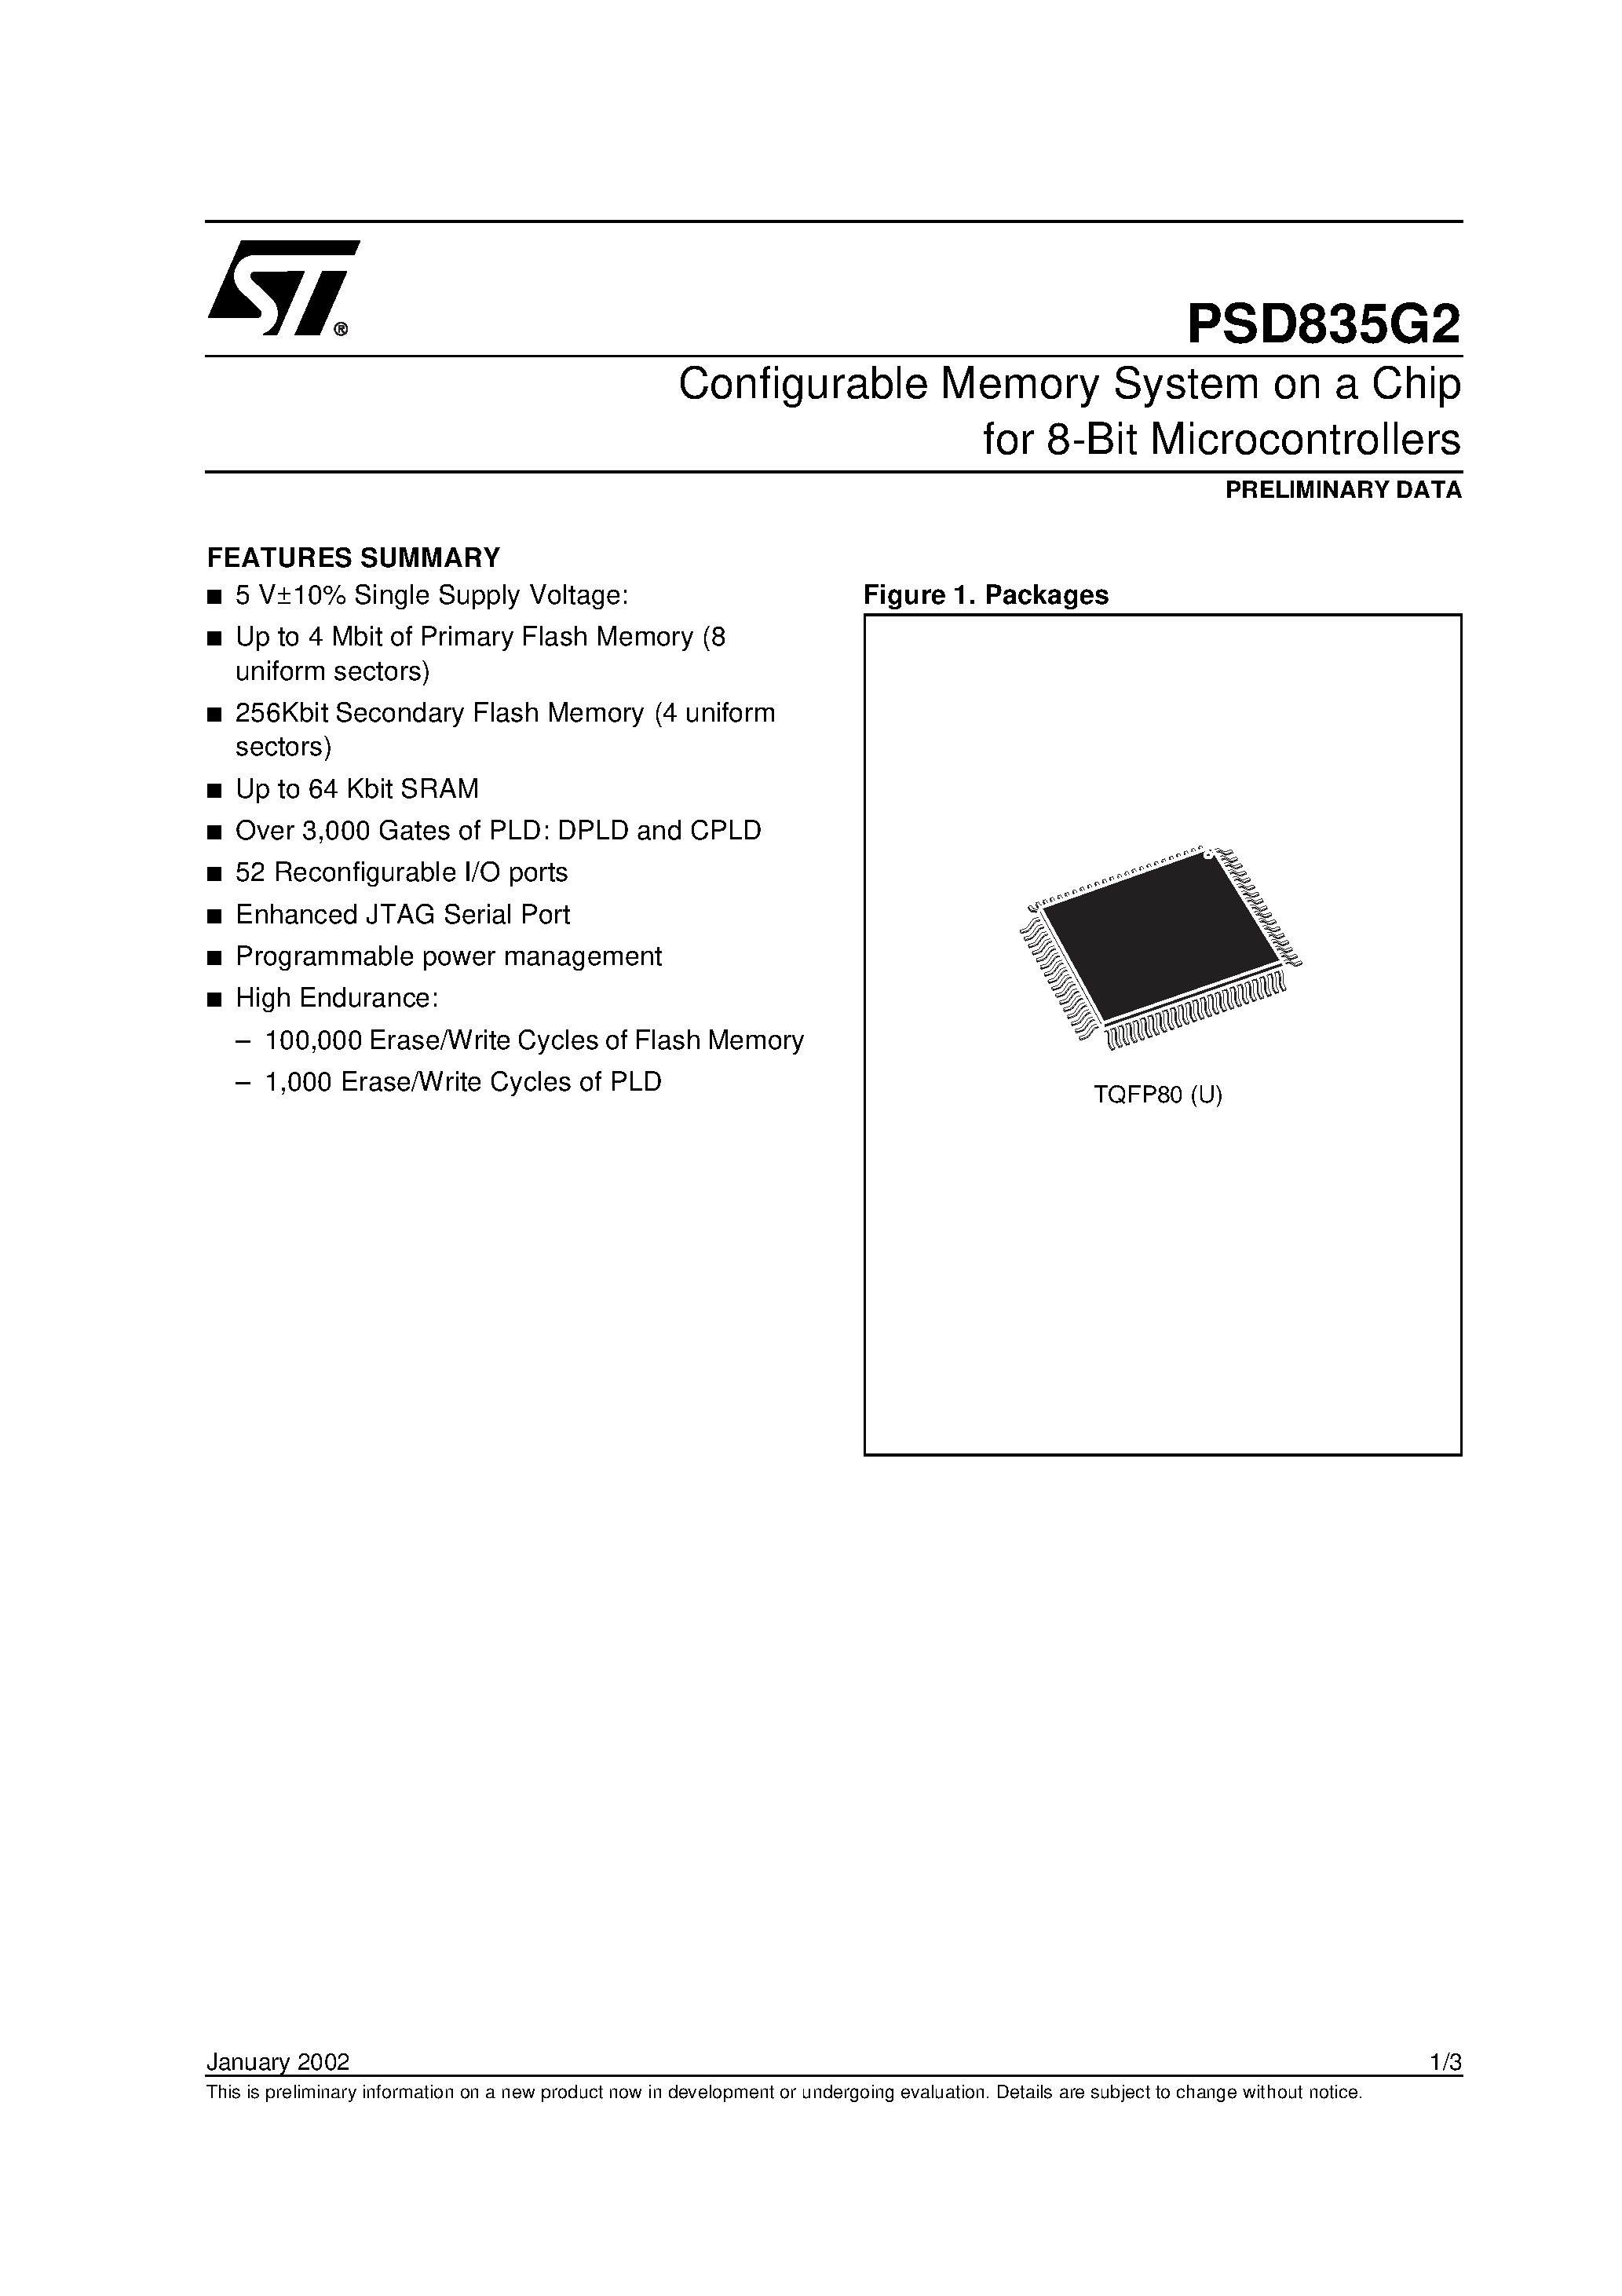 Datasheet PSD835F2V-A-15B81I - Configurable Memory System on a Chip for 8-Bit Microcontrollers page 1